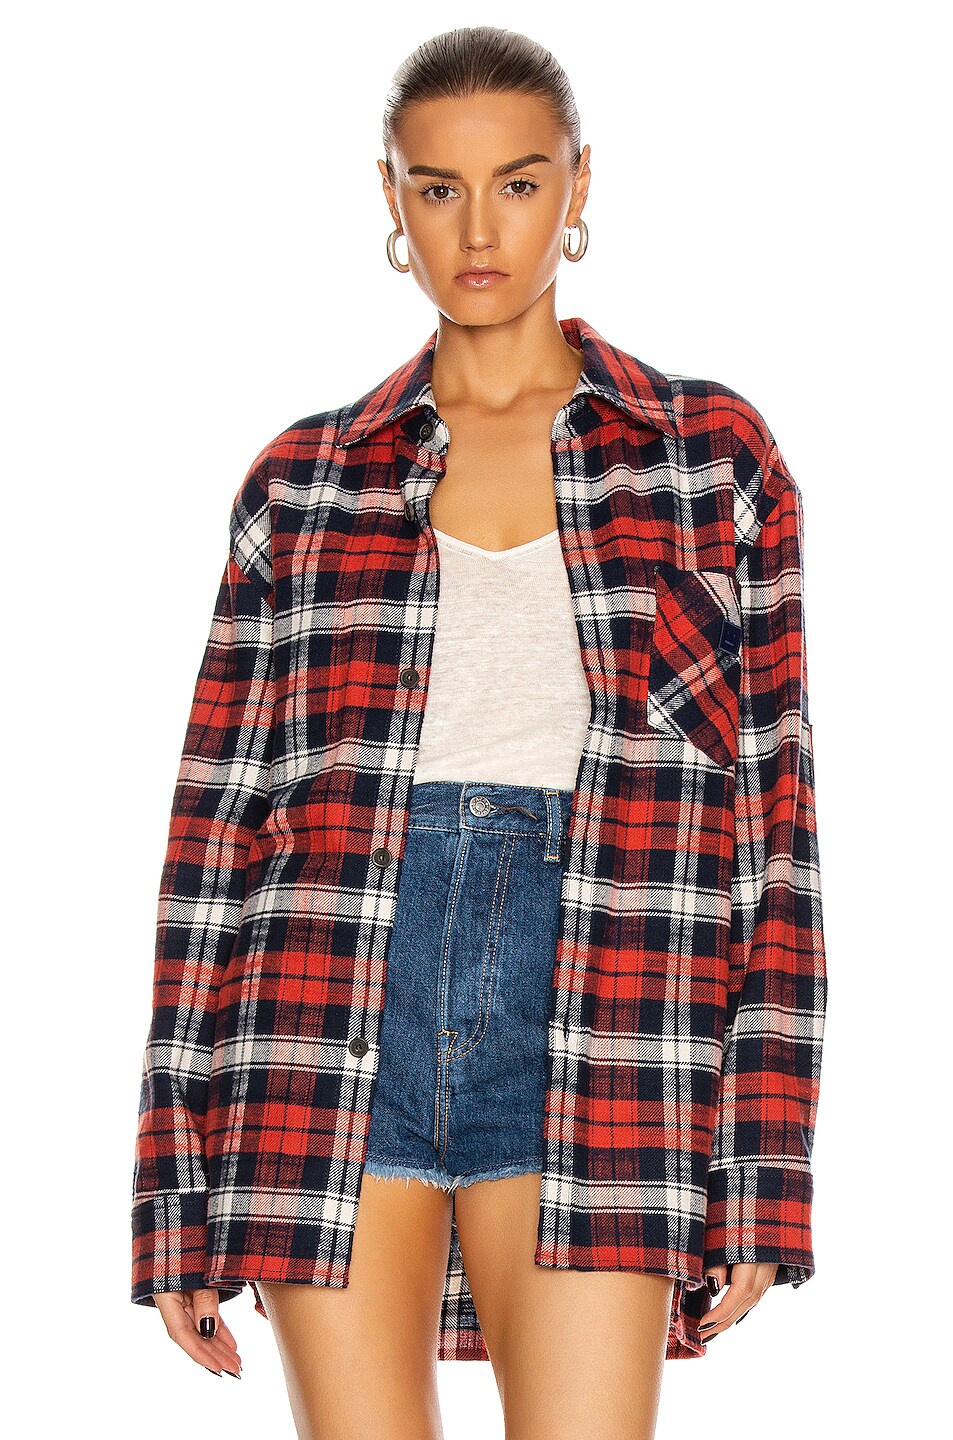 Acne Studios Salak Flannel Face Shirt in Red & Navy | FWRD